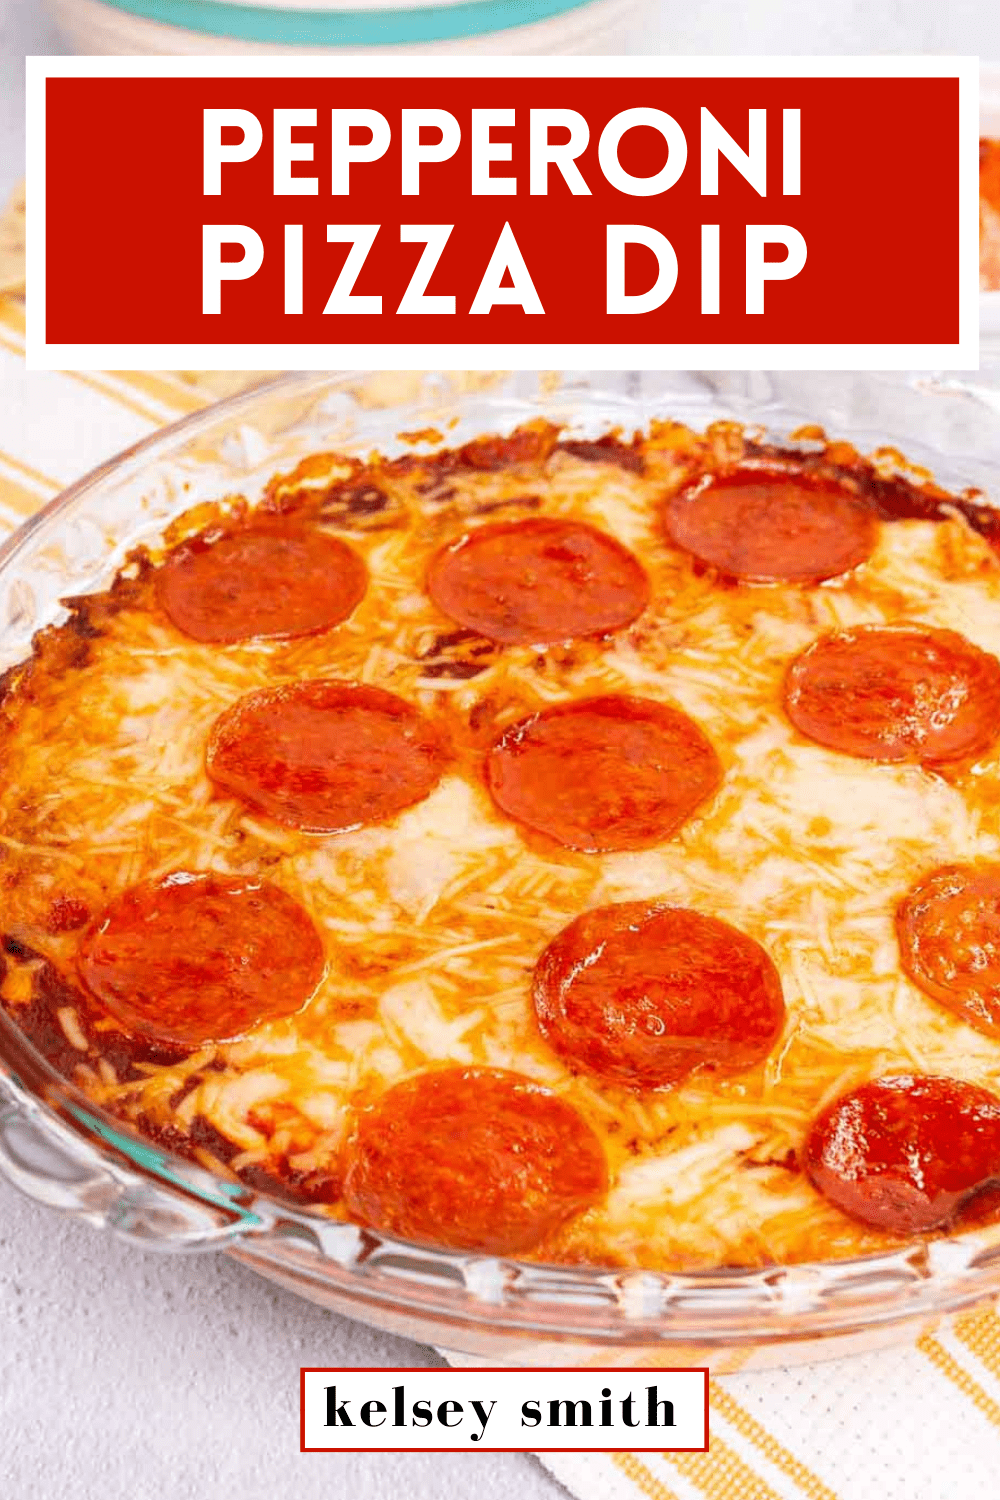 Top down view of pizza dip baked in a pie plate. The dip is topped with pepperoni. Text at the top reads Pepperoni Pizza Dip.